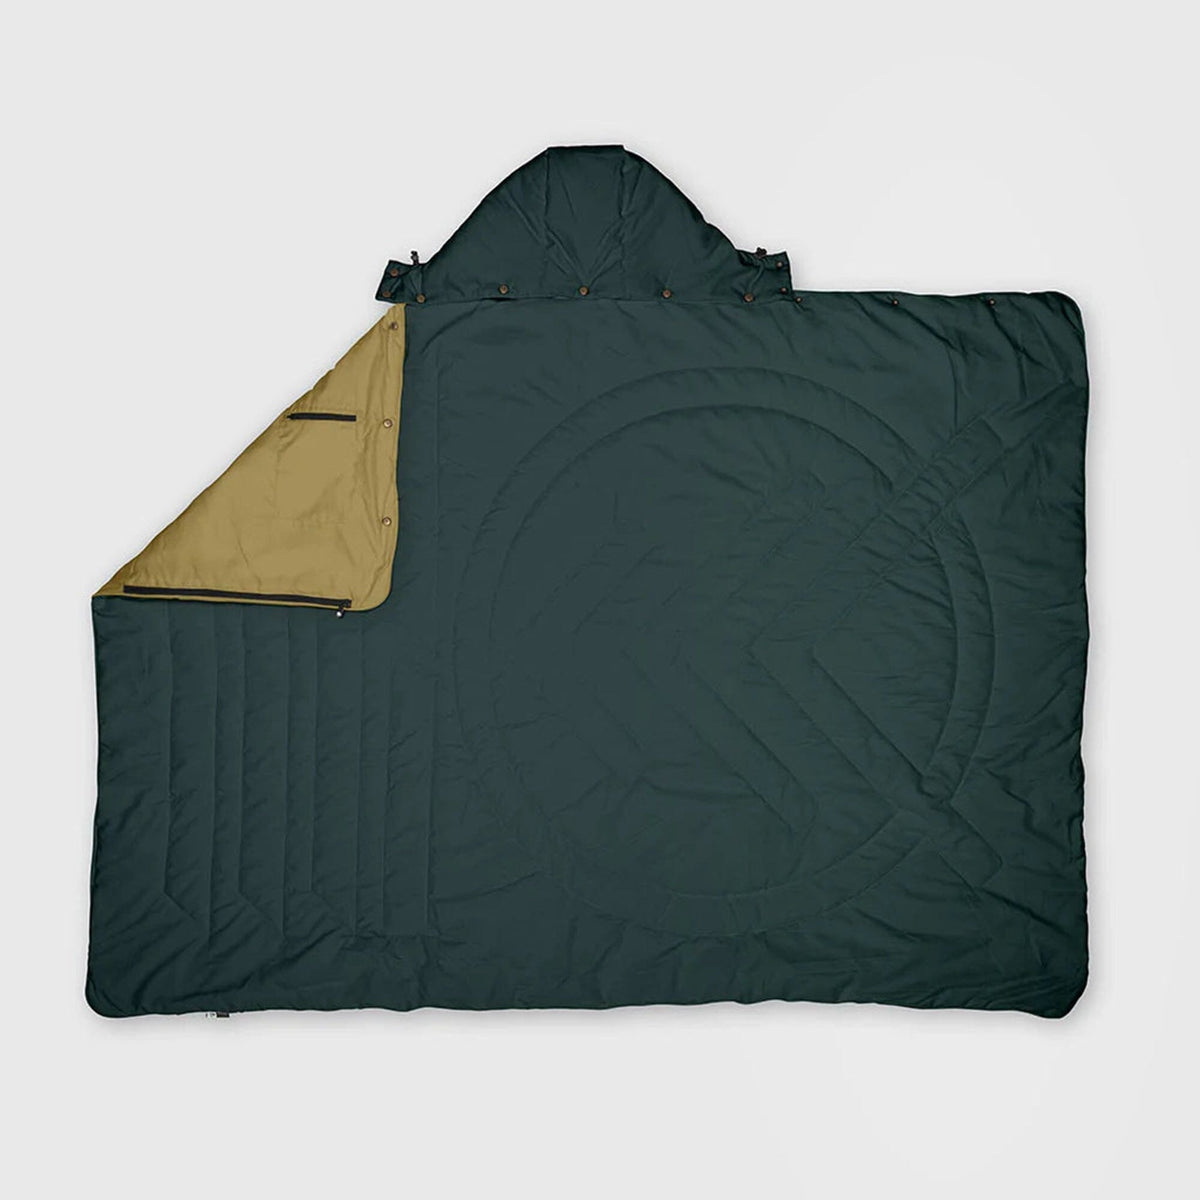 VOITED Recycled Ripstop Travel Blanket - Green Gabels / Dusty Sand